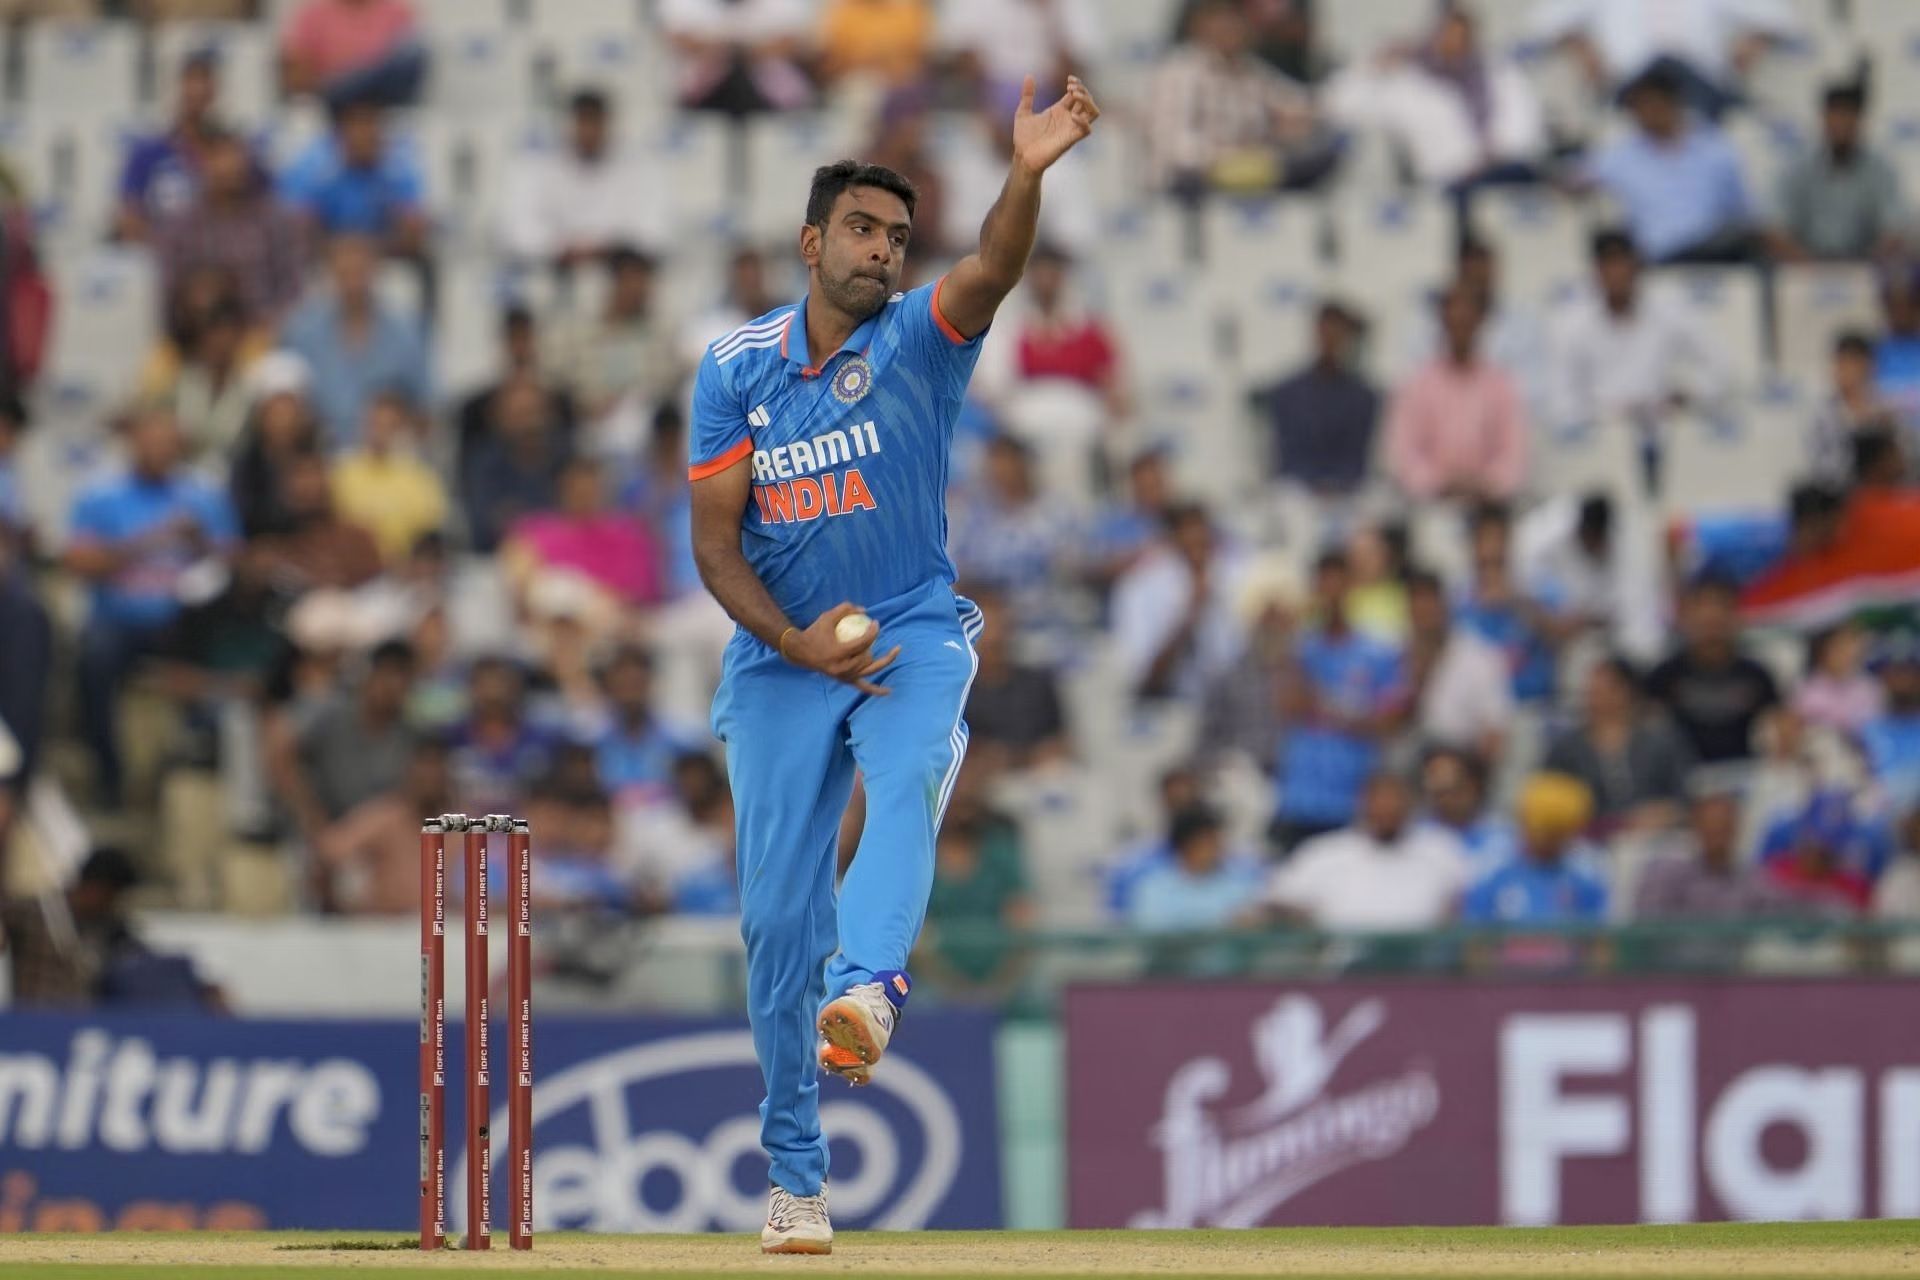 R Ashwin has played just one match in the World Cup thus far. [P/C: AP]